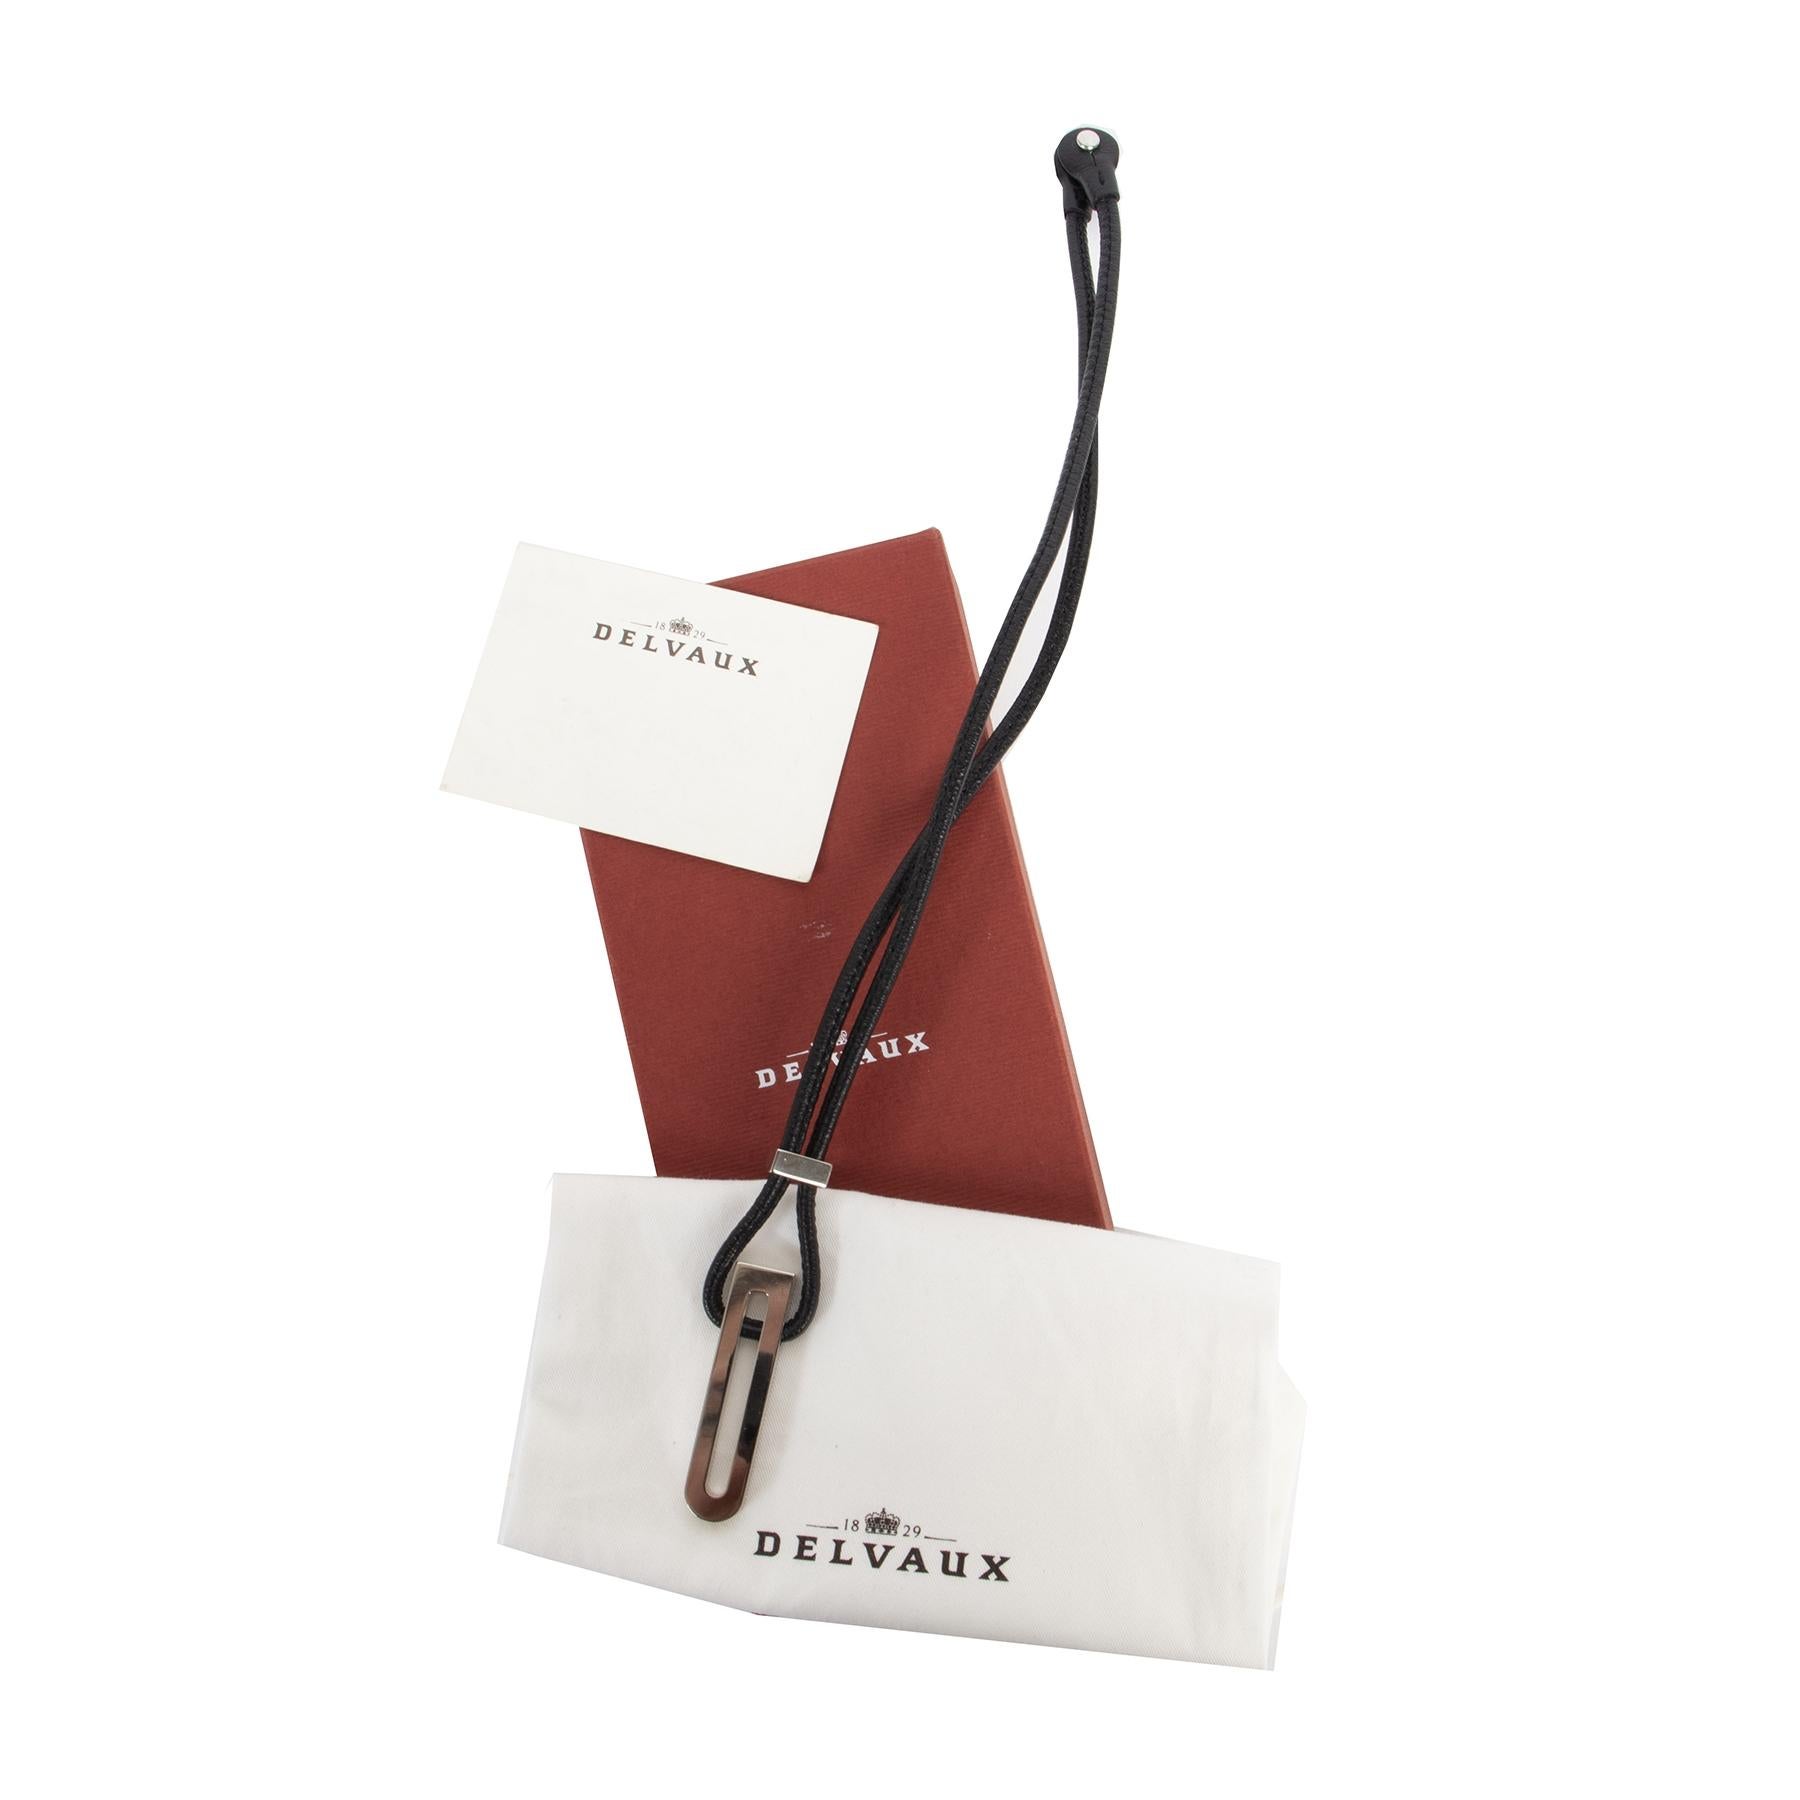 Very good preloved condition

Delvaux Black Leather Silver D Necklace

This minimalistic and timeless Delvaux necklace is perfect for every occasion, whether you're wearing it to a party or to work. The necklace is crafted in black leather and